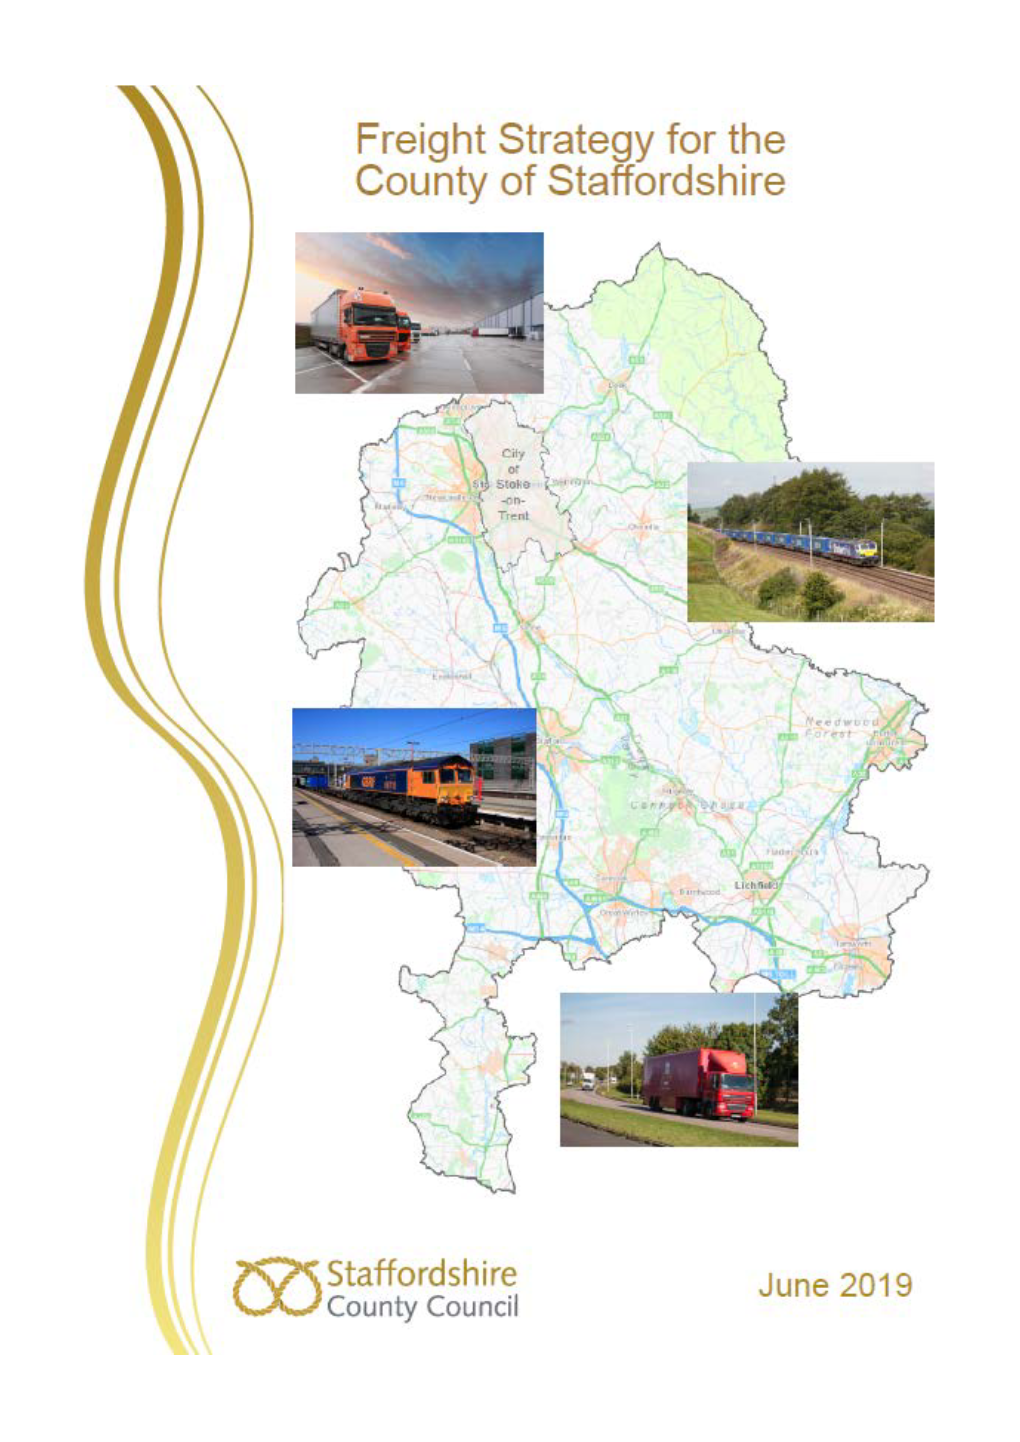 Staffordshire-Freight-Strategy-June